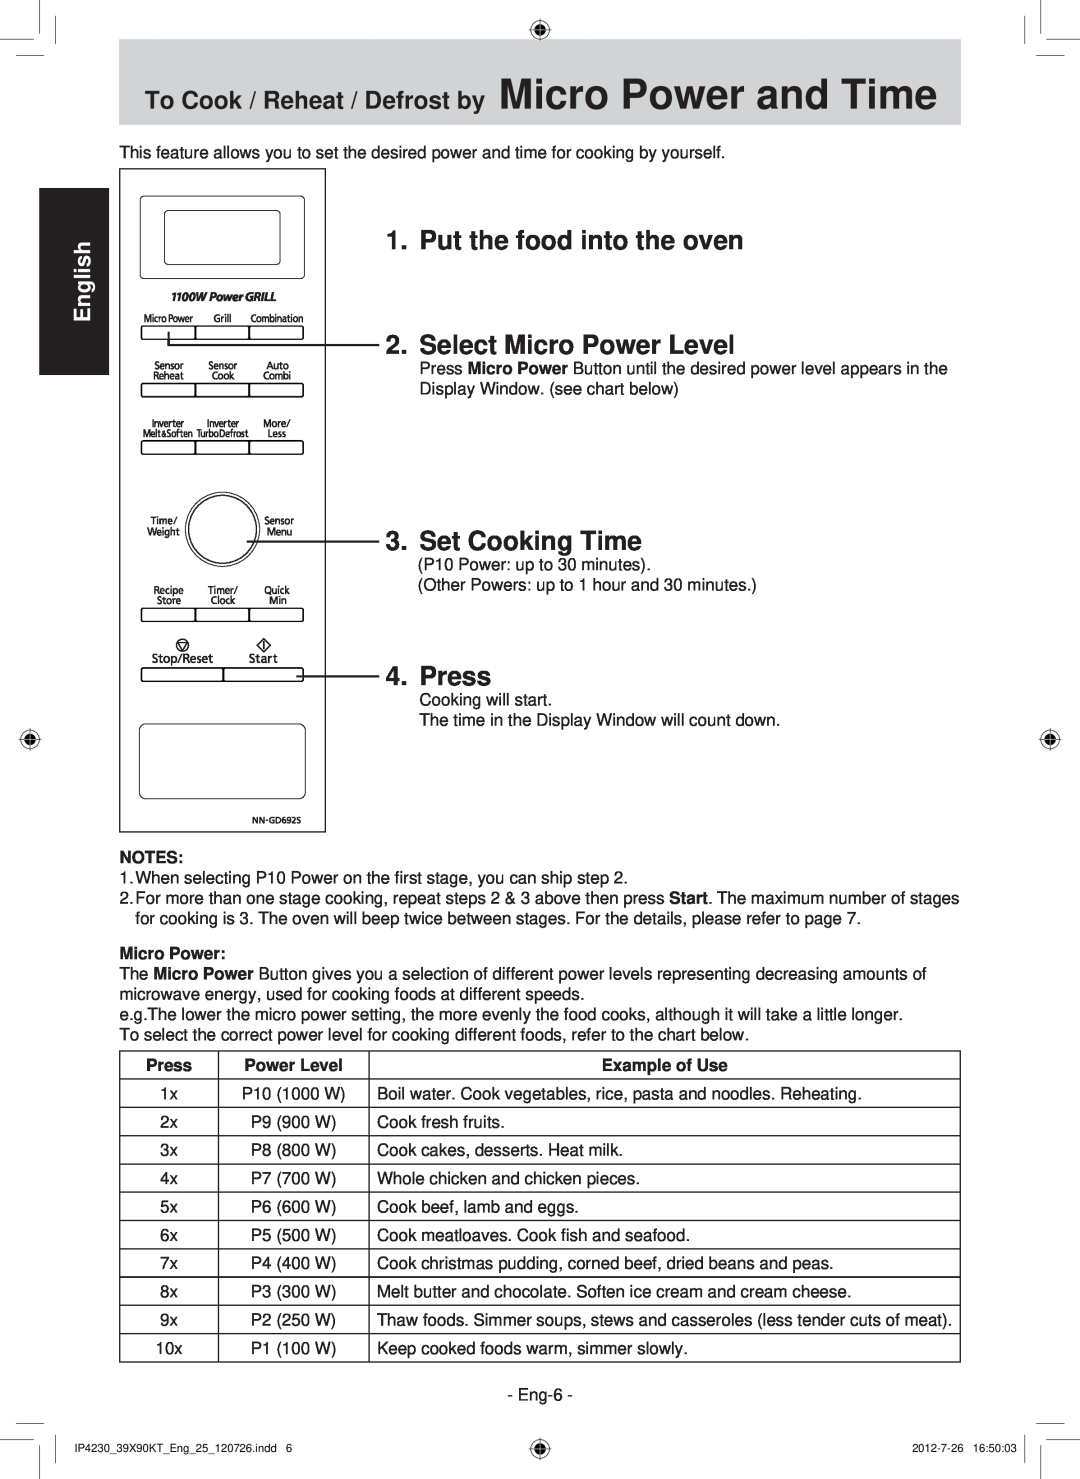 Panasonic F00039X90KT Put the food into the oven, Select Micro Power Level, Set Cooking Time, Press, English 